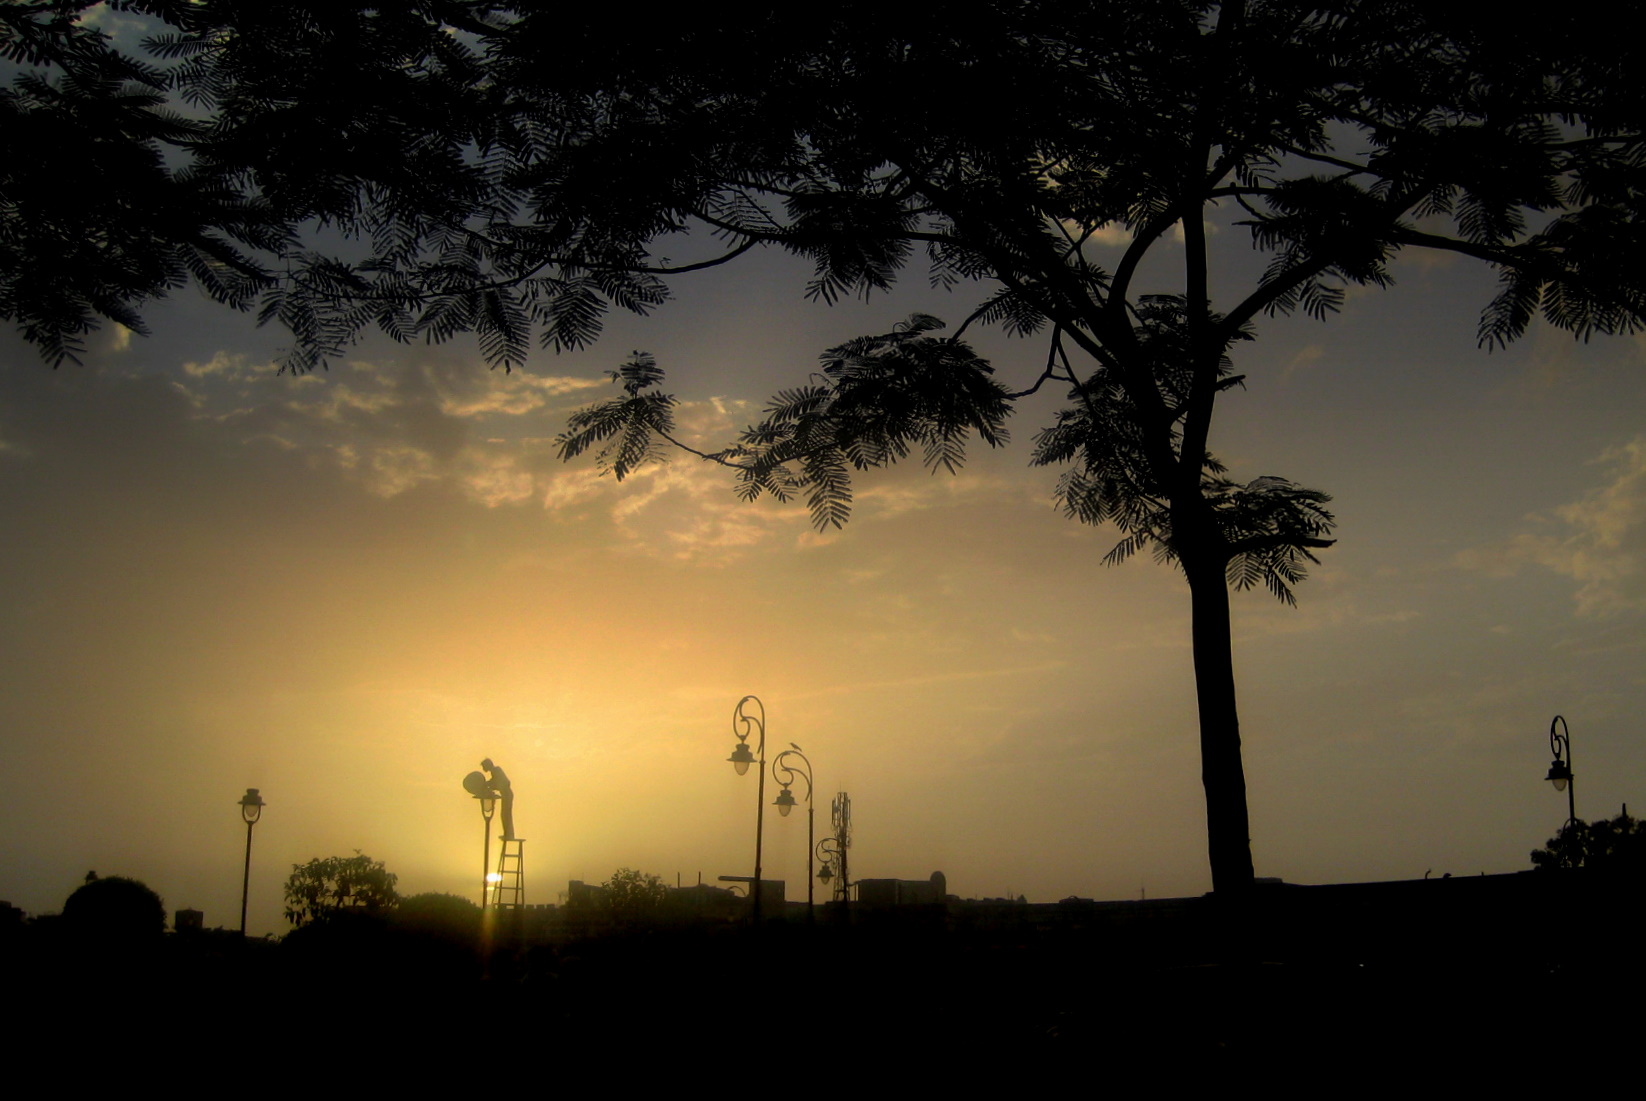 a sunset view with some tree and street lights in the foreground